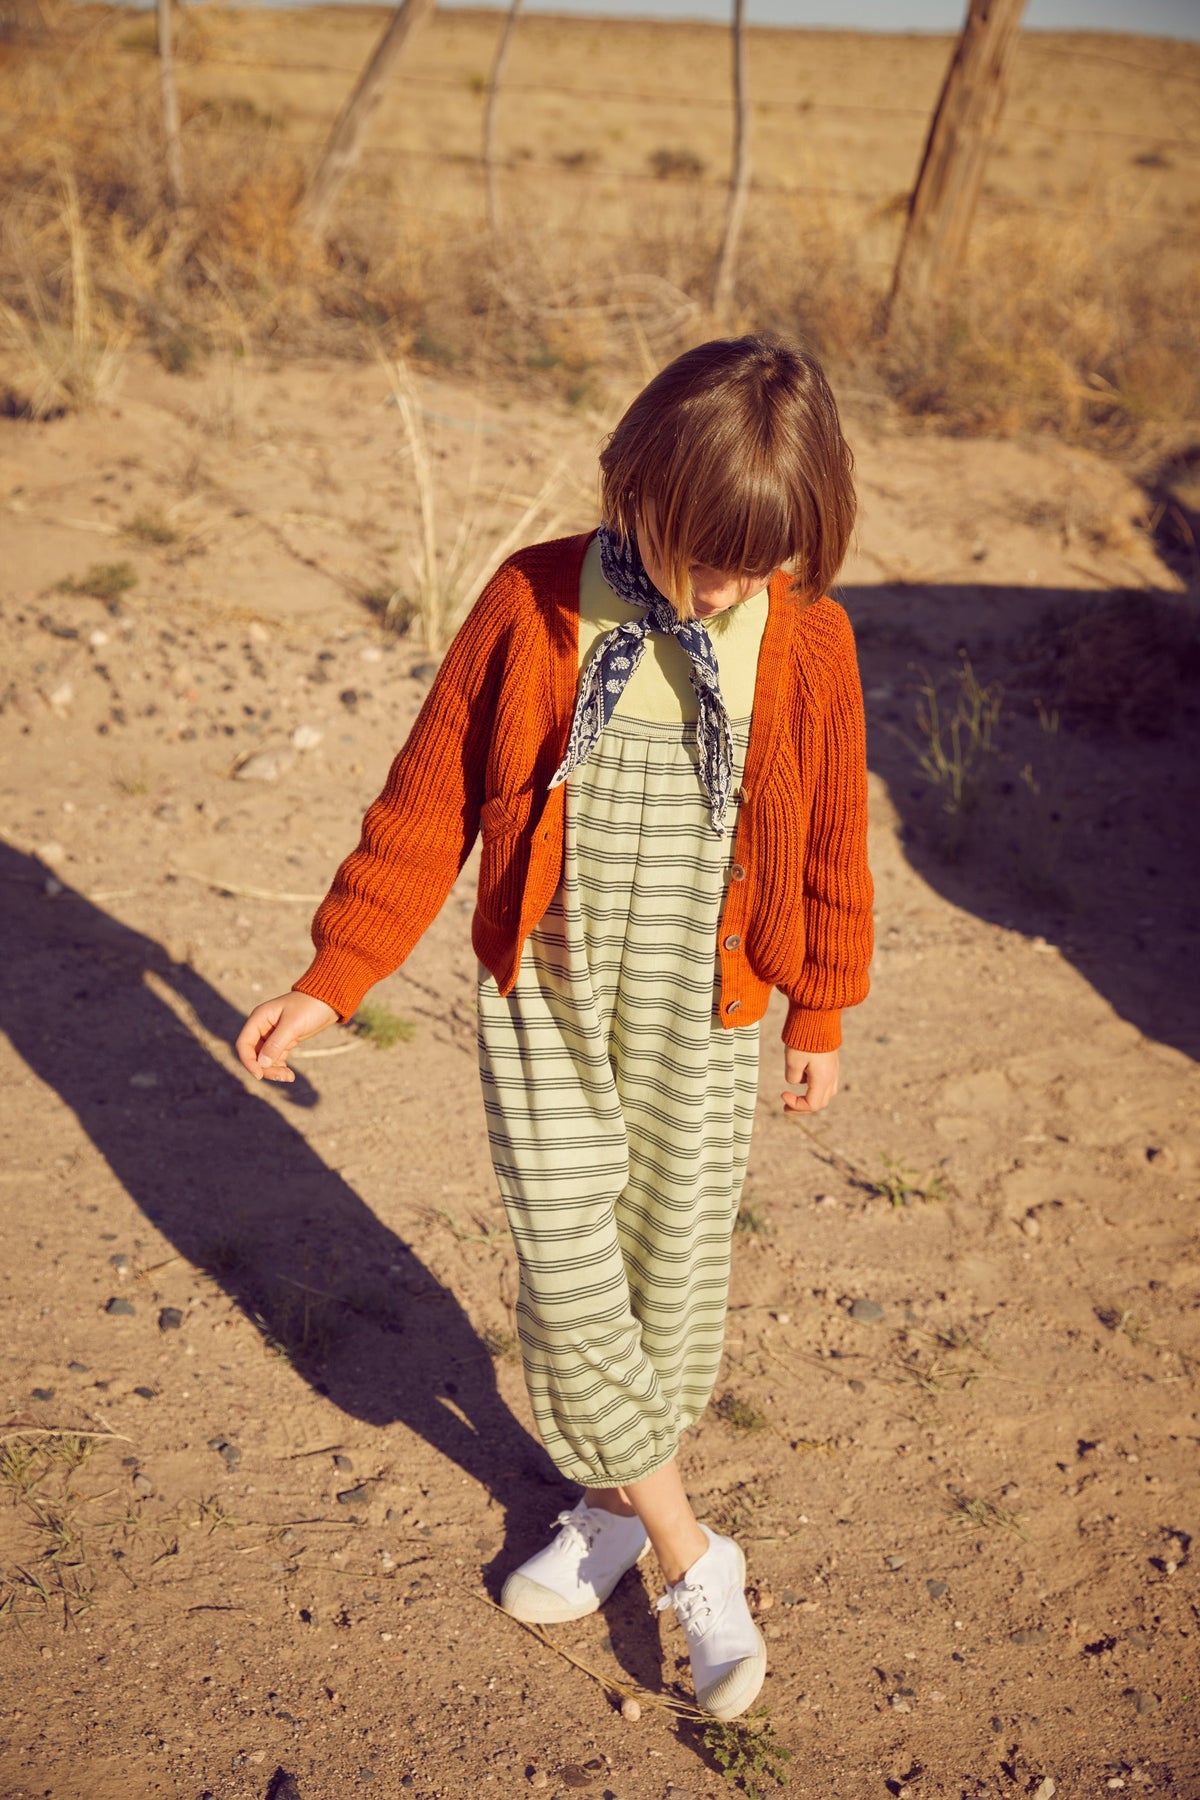 Fisherman Rib Everyday Cardigan - Marmalade+Model is 50 inches tall, 49lbs and wearing size 7-8y